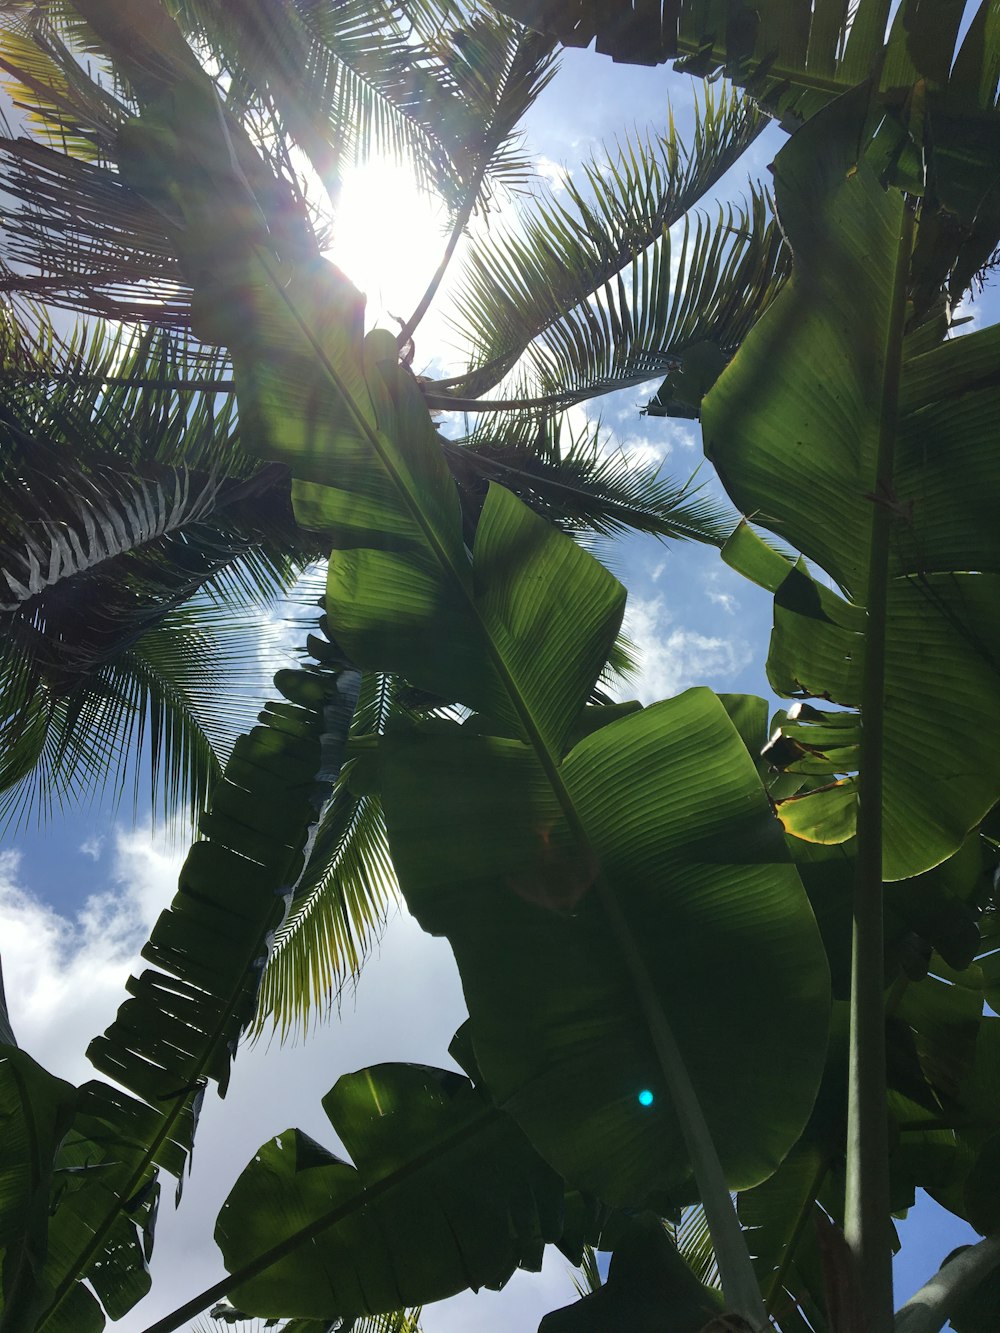 low-angle photography of banana plant and coconut plant during daytime